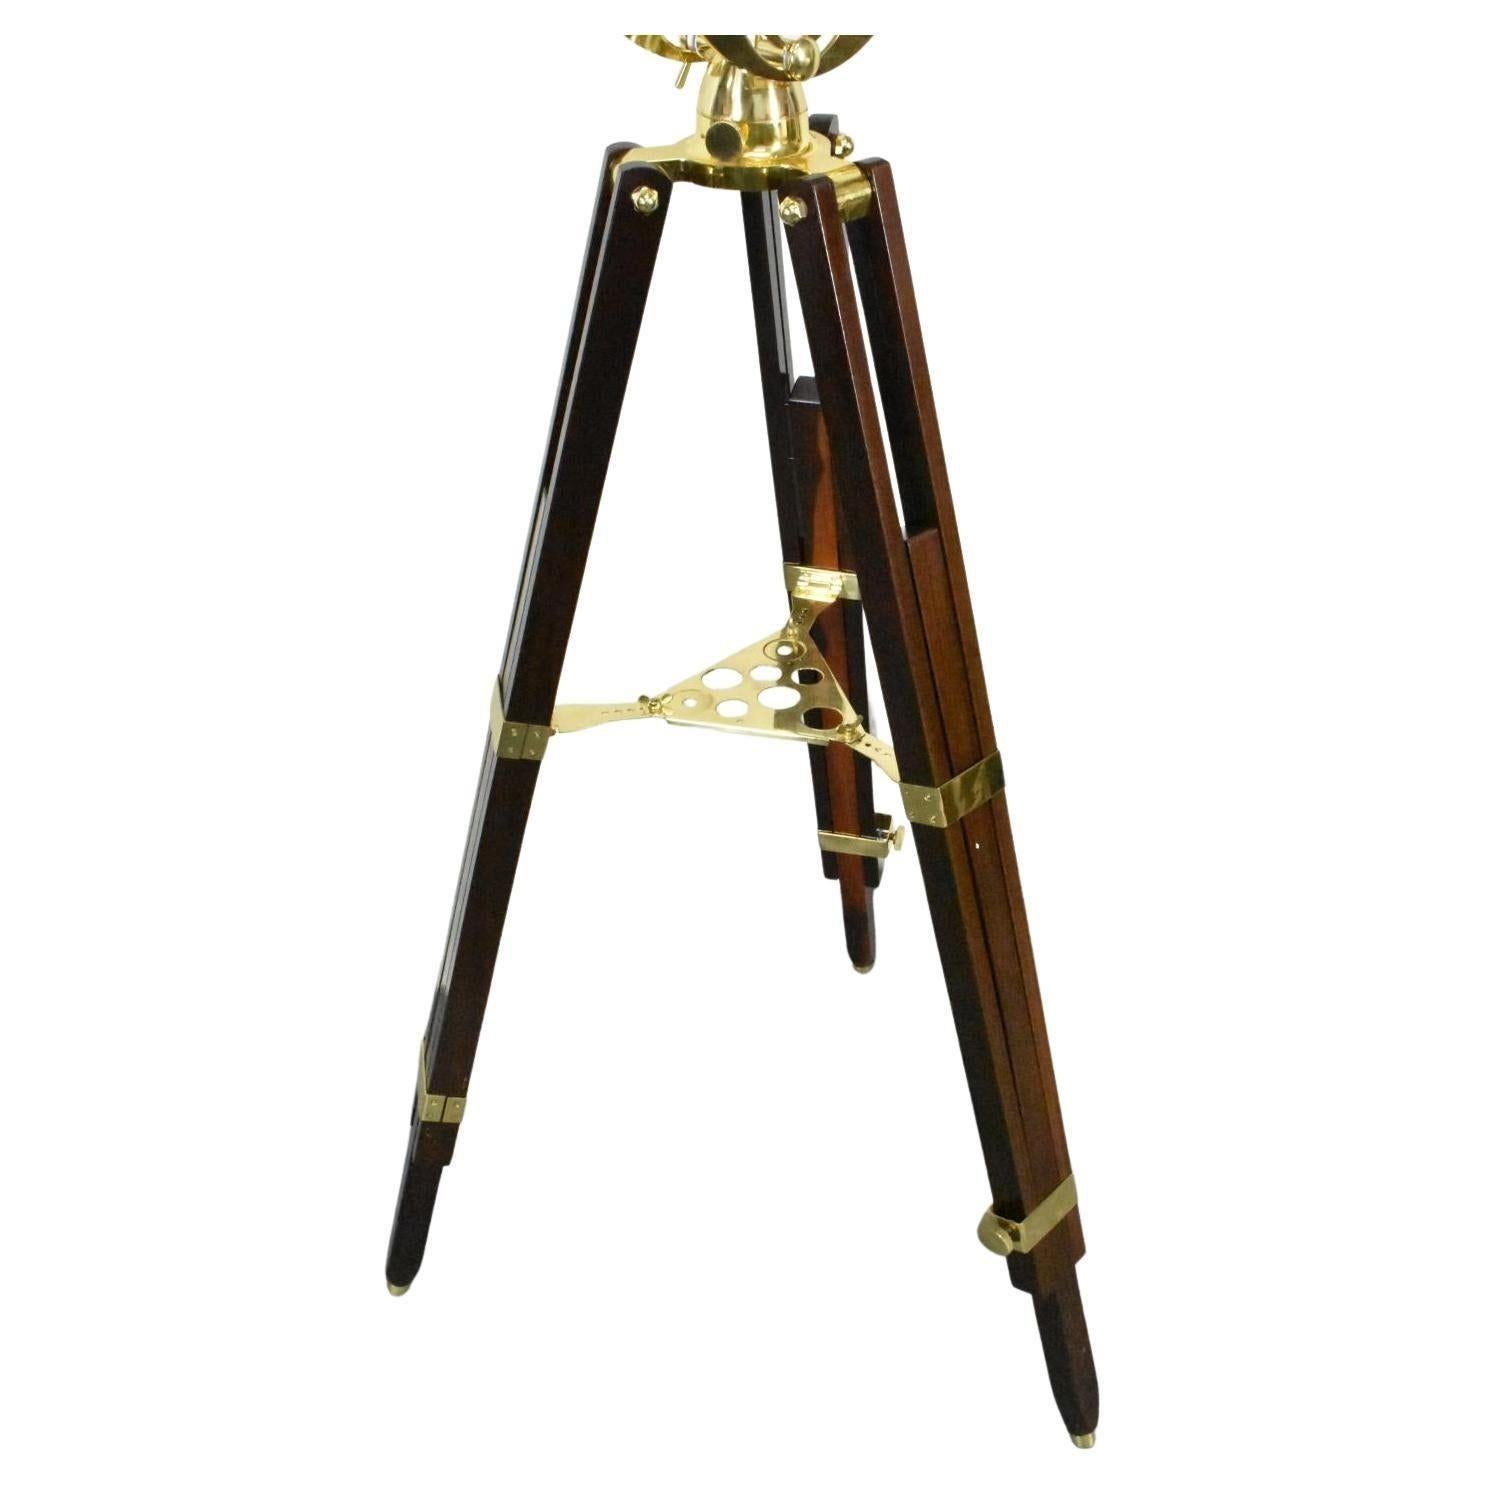 An exceptional vintage Barska Anchormaster AE 10824 brass telescope with quality mahogany tripod legs that extend. Includes 